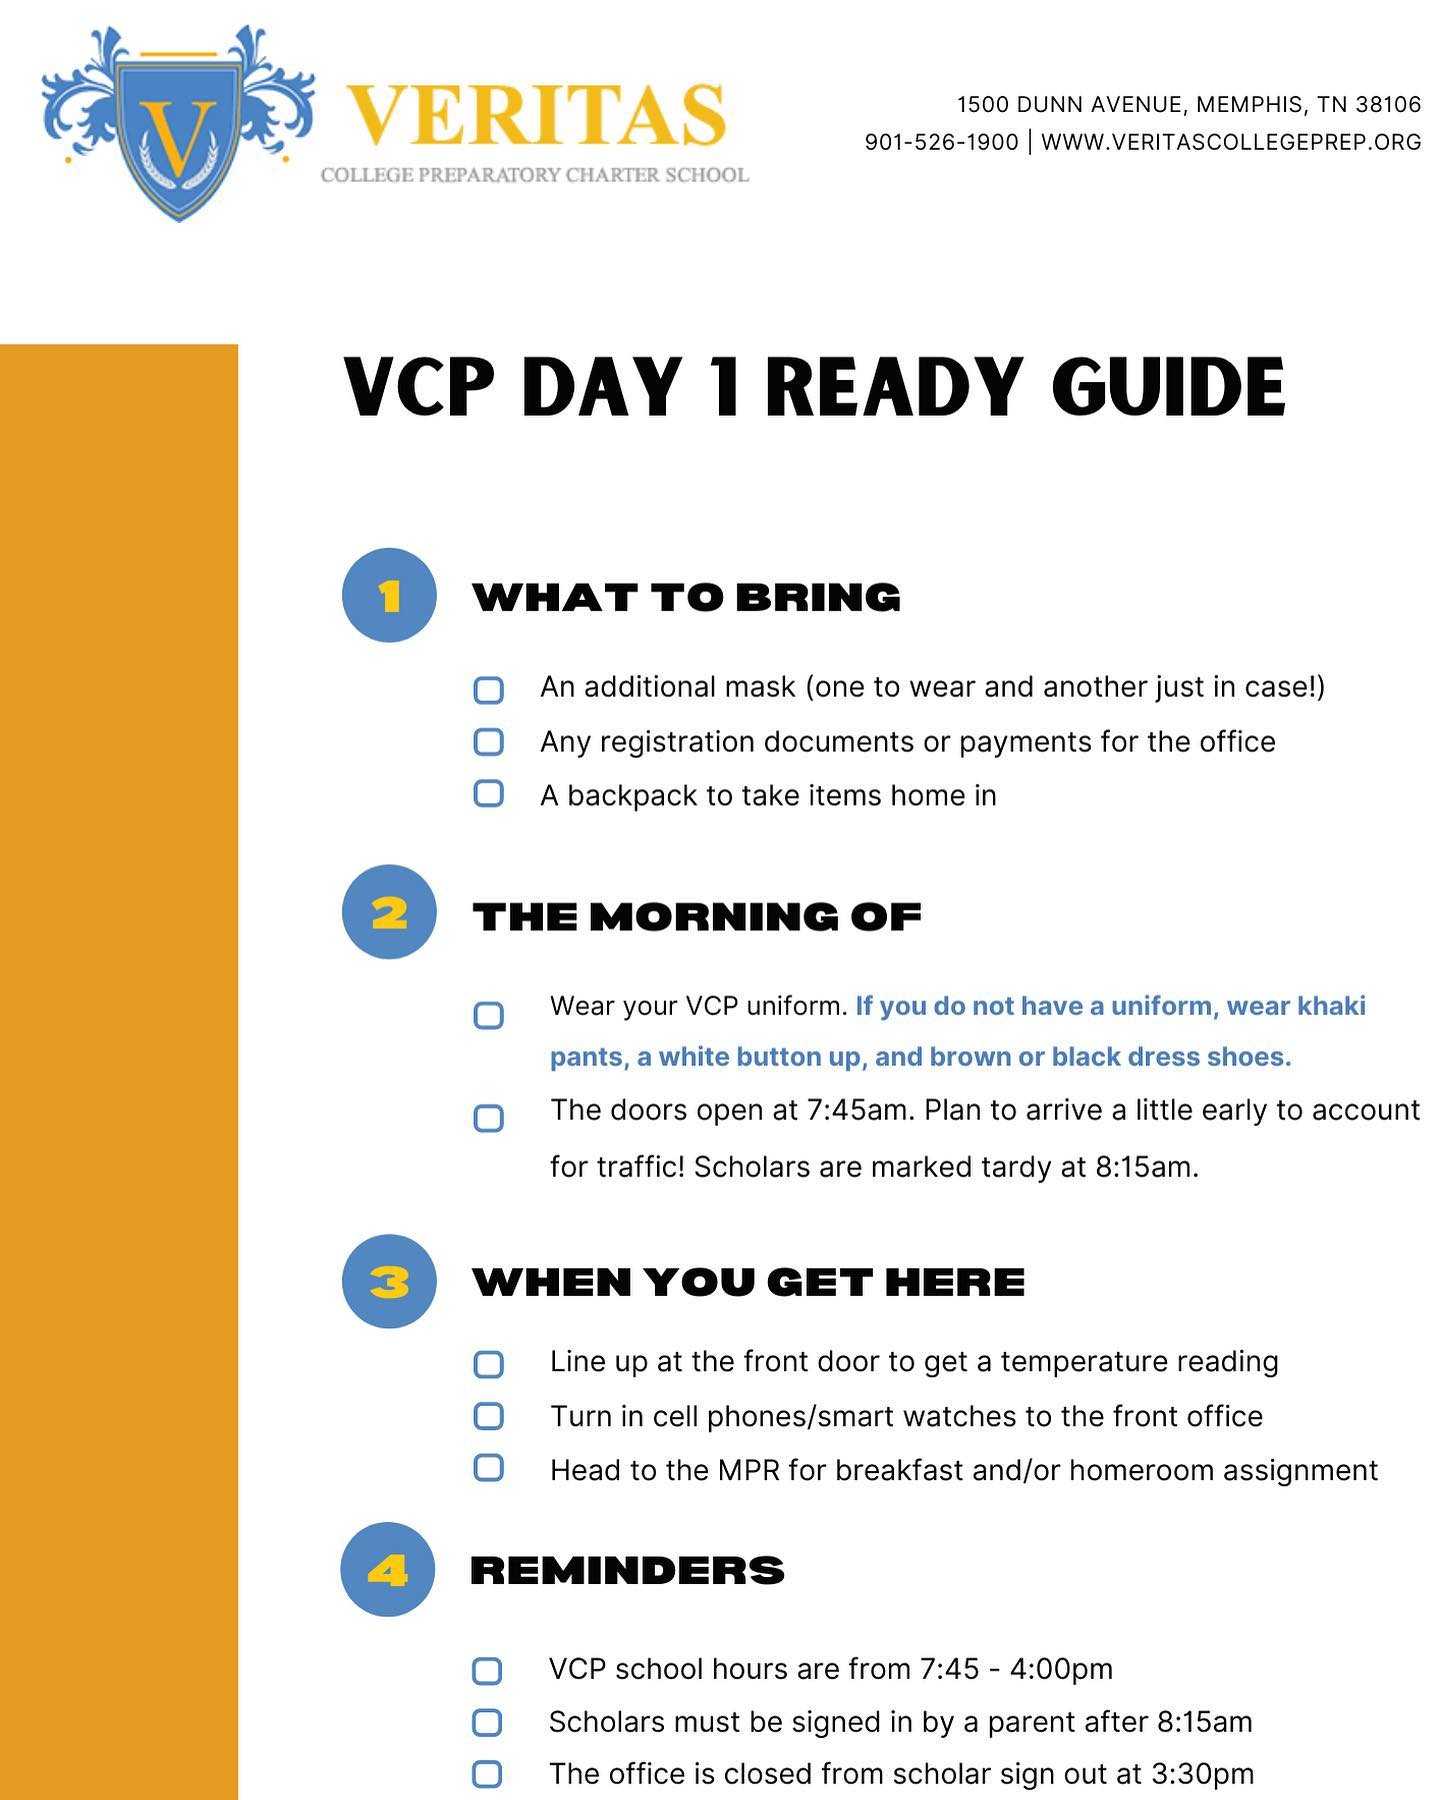 VCP Day 1 Ready Guide